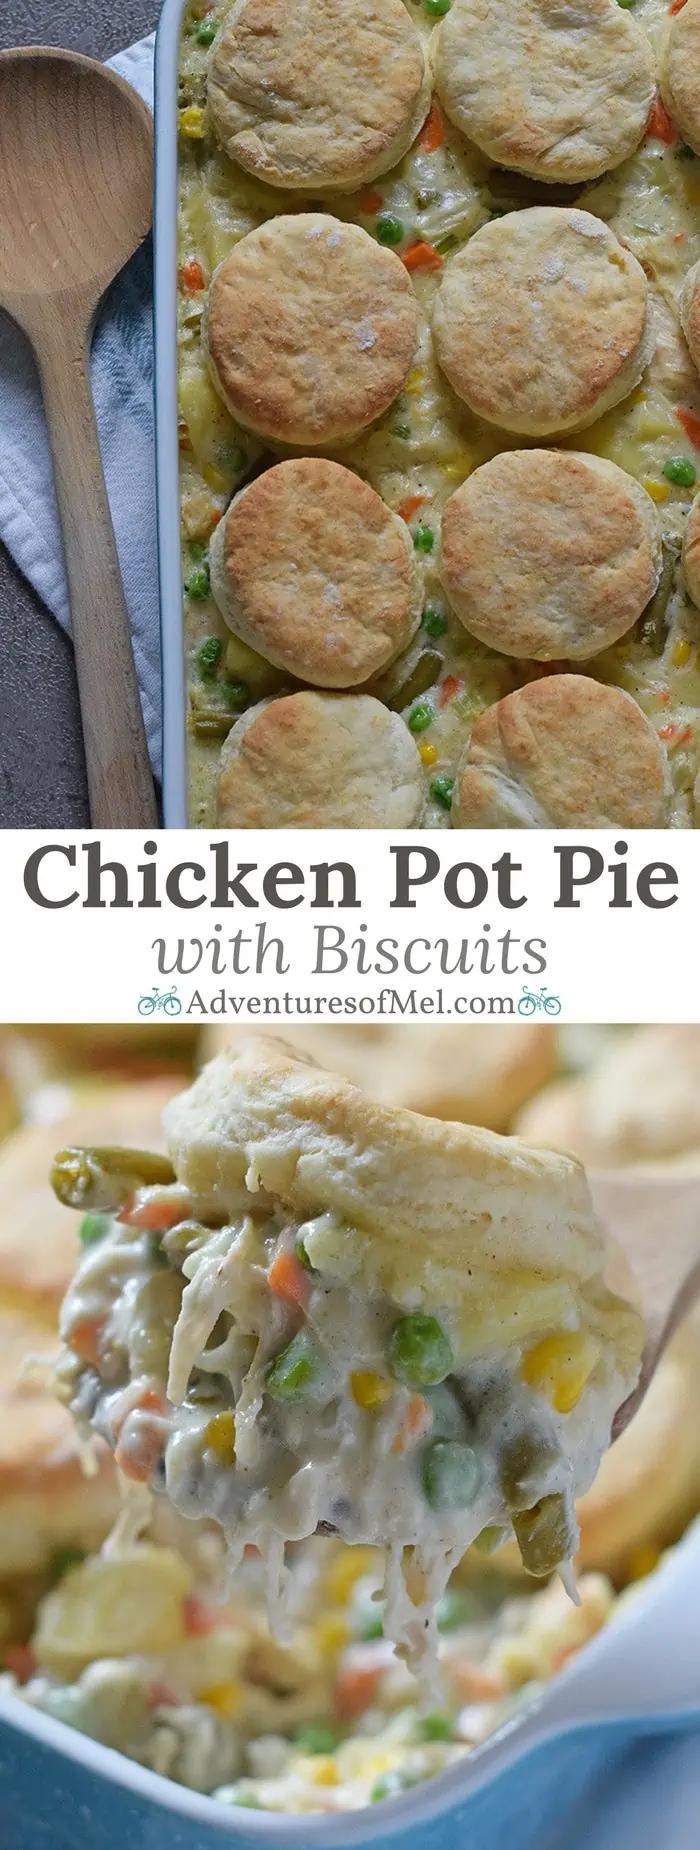 Chicken Pot Pie with Grandma's biscuits, filled with a medley of vegetables in a creamy sauce, seasoned with sage. Ultimate comfort food dinner recipe.